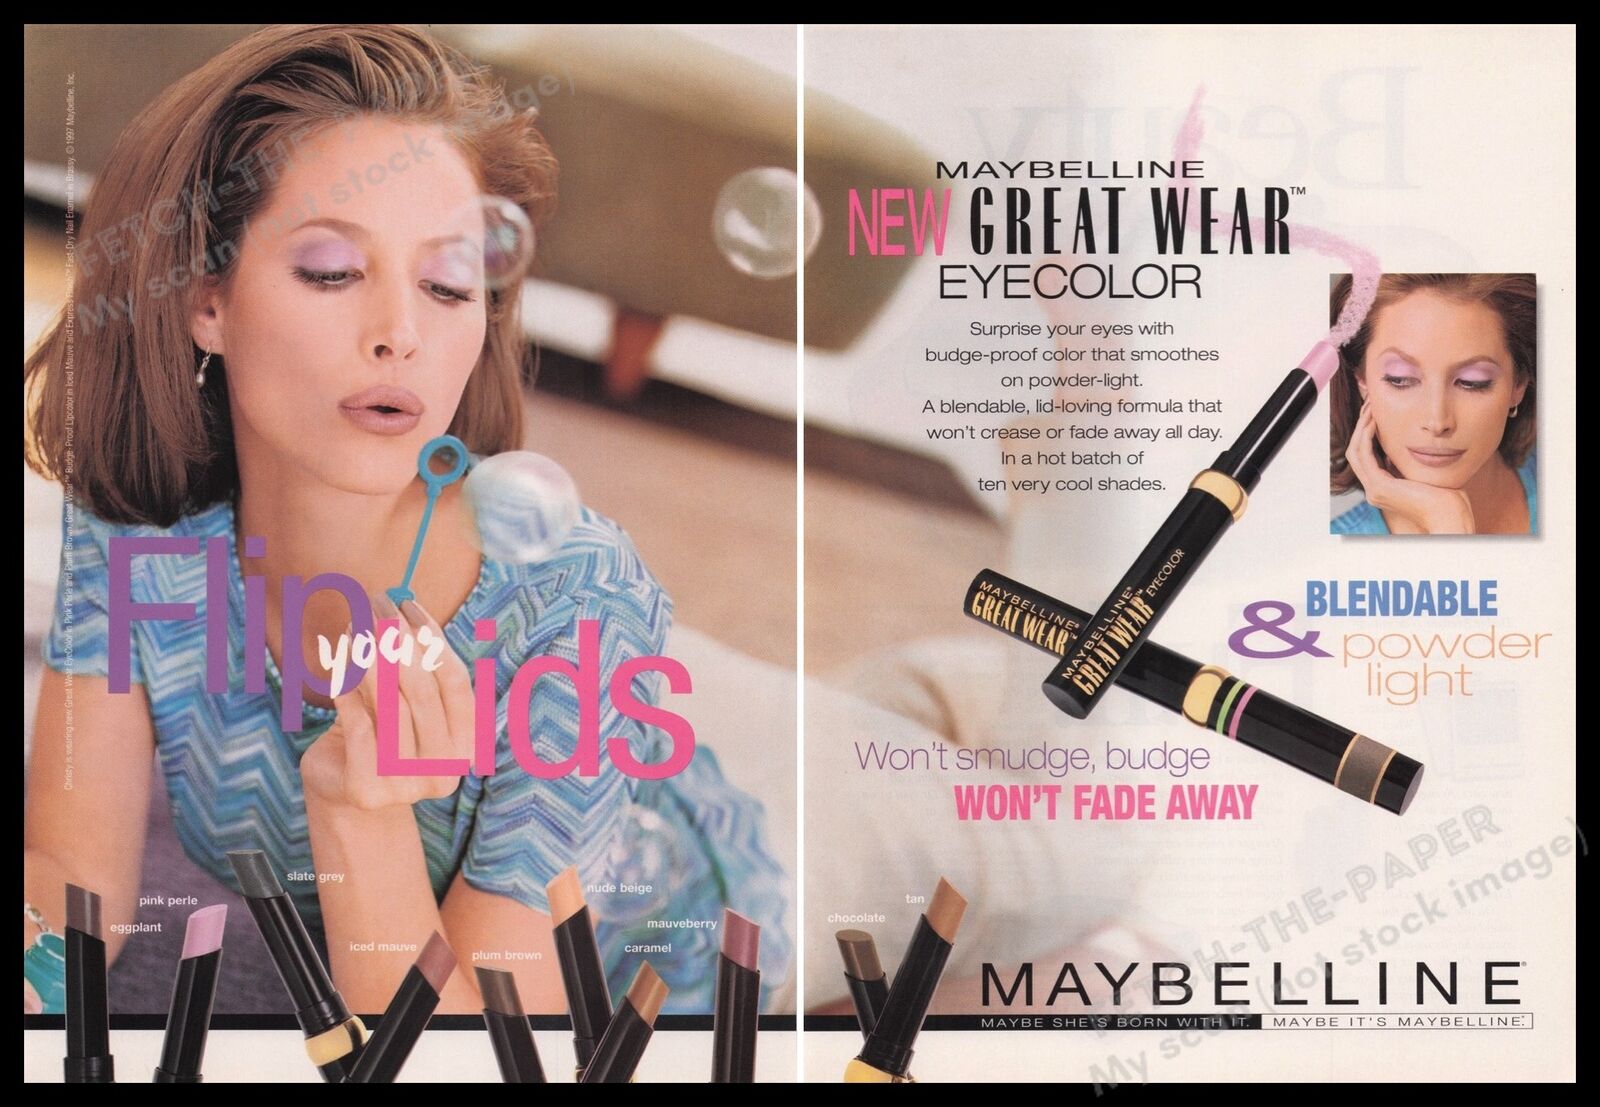 Maybelline Christy Turlington 1990s Print Advertisement Ad (2 pages) 1997